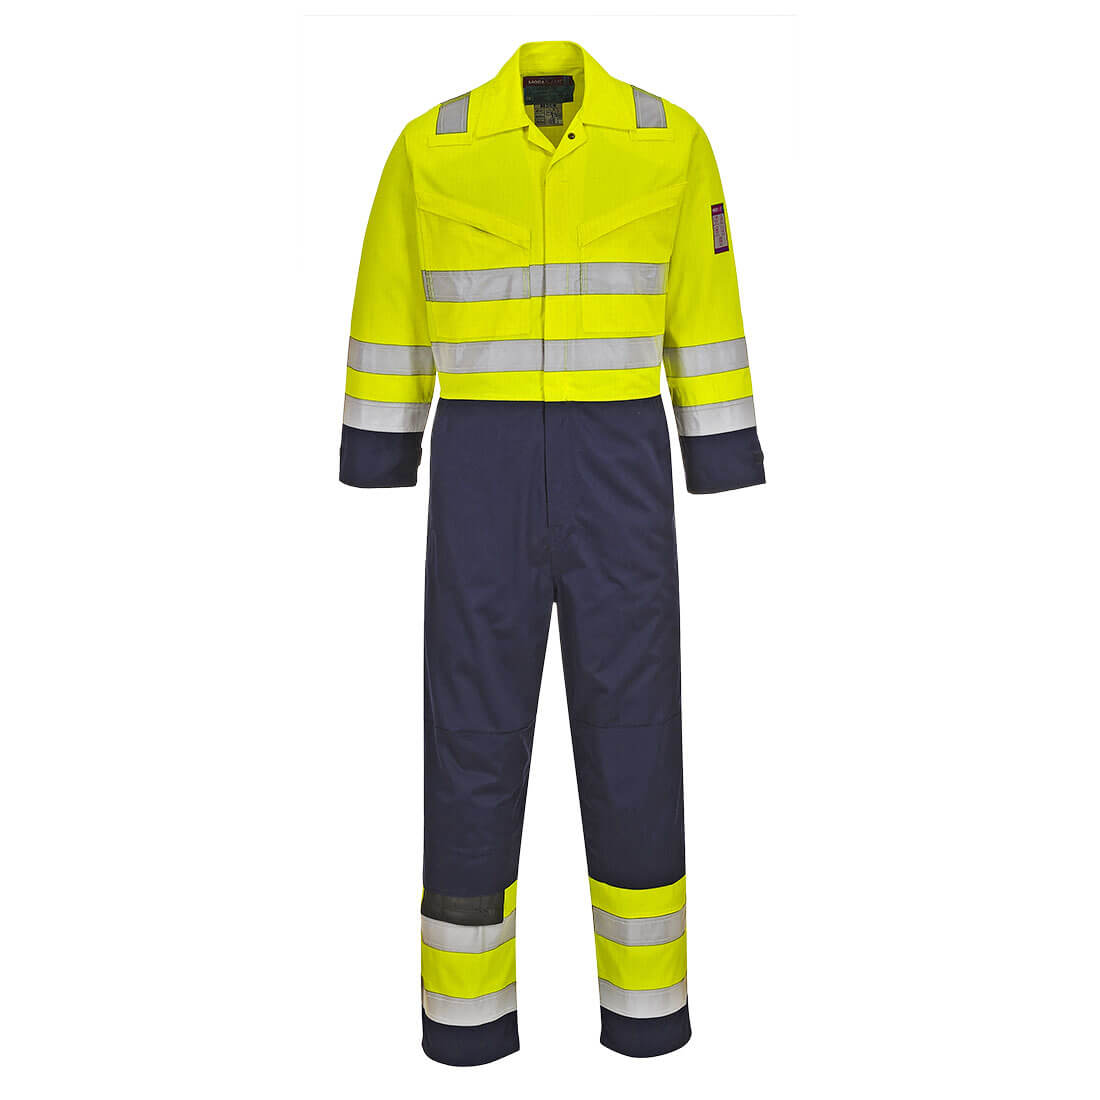 Image of Modaflame Flame Resistant Hi Vis Overall Yellow / Navy 4XL 32"